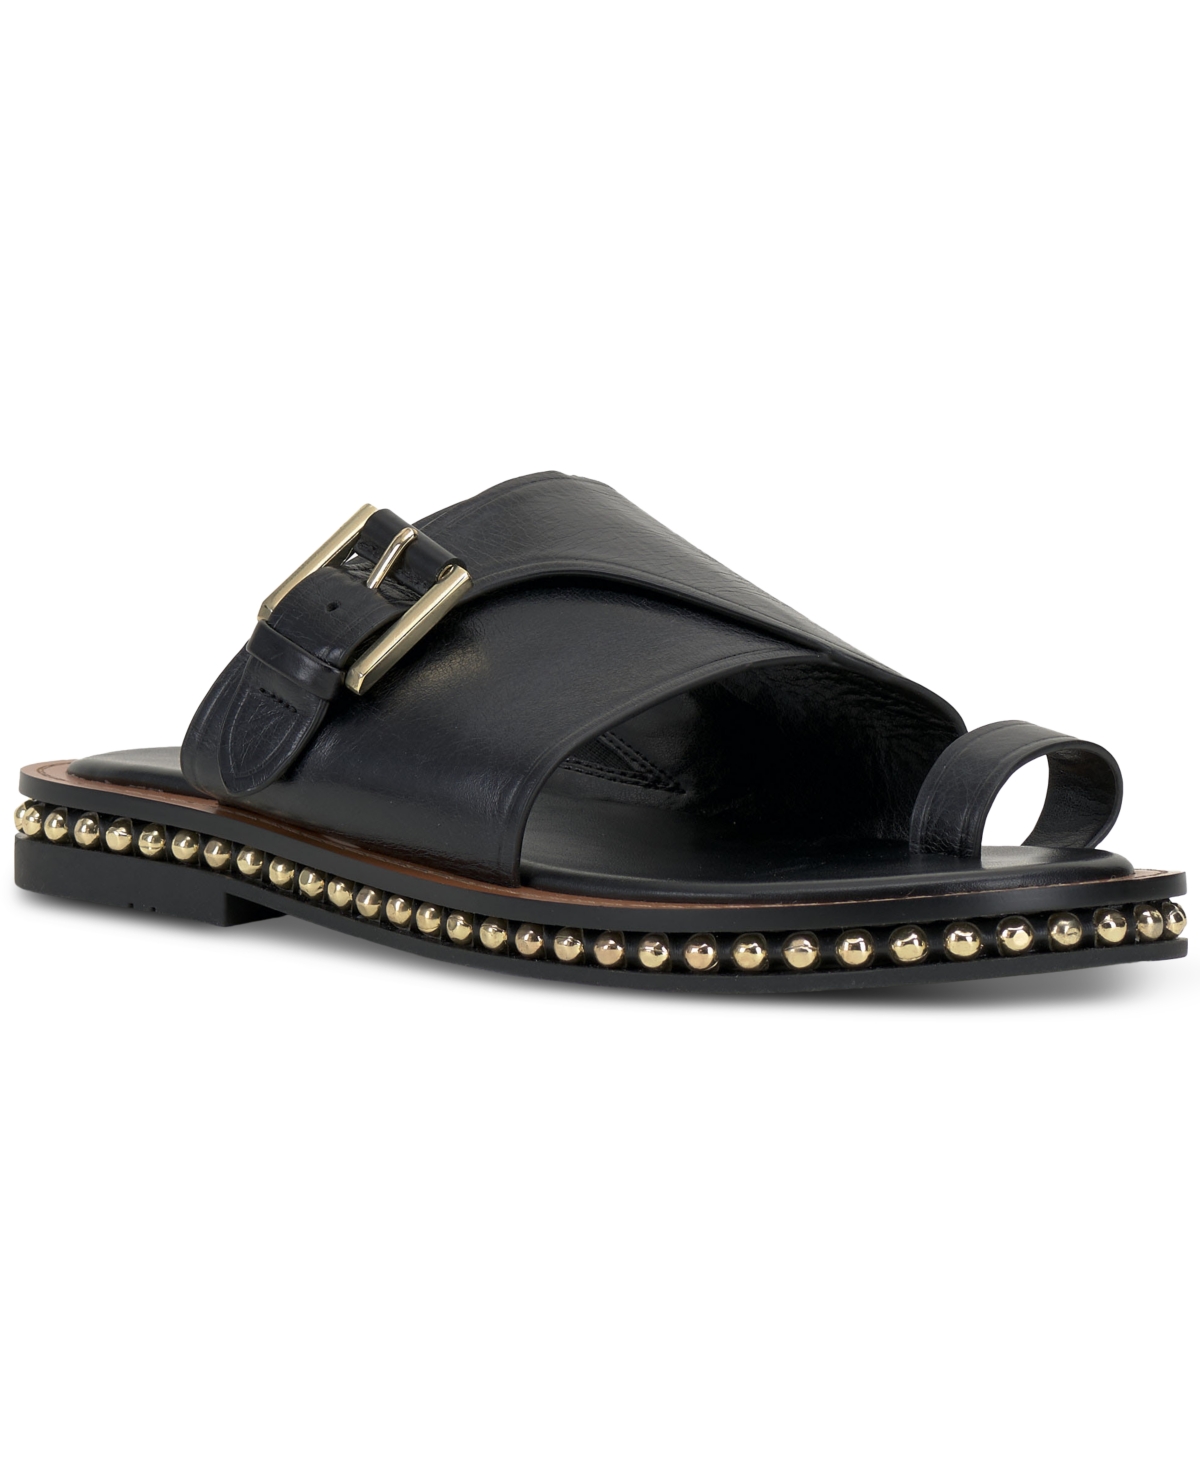 UPC 196672387386 product image for Vince Camuto Women's Cooliann Hooded Thong Flat Sandals Women's Shoes | upcitemdb.com